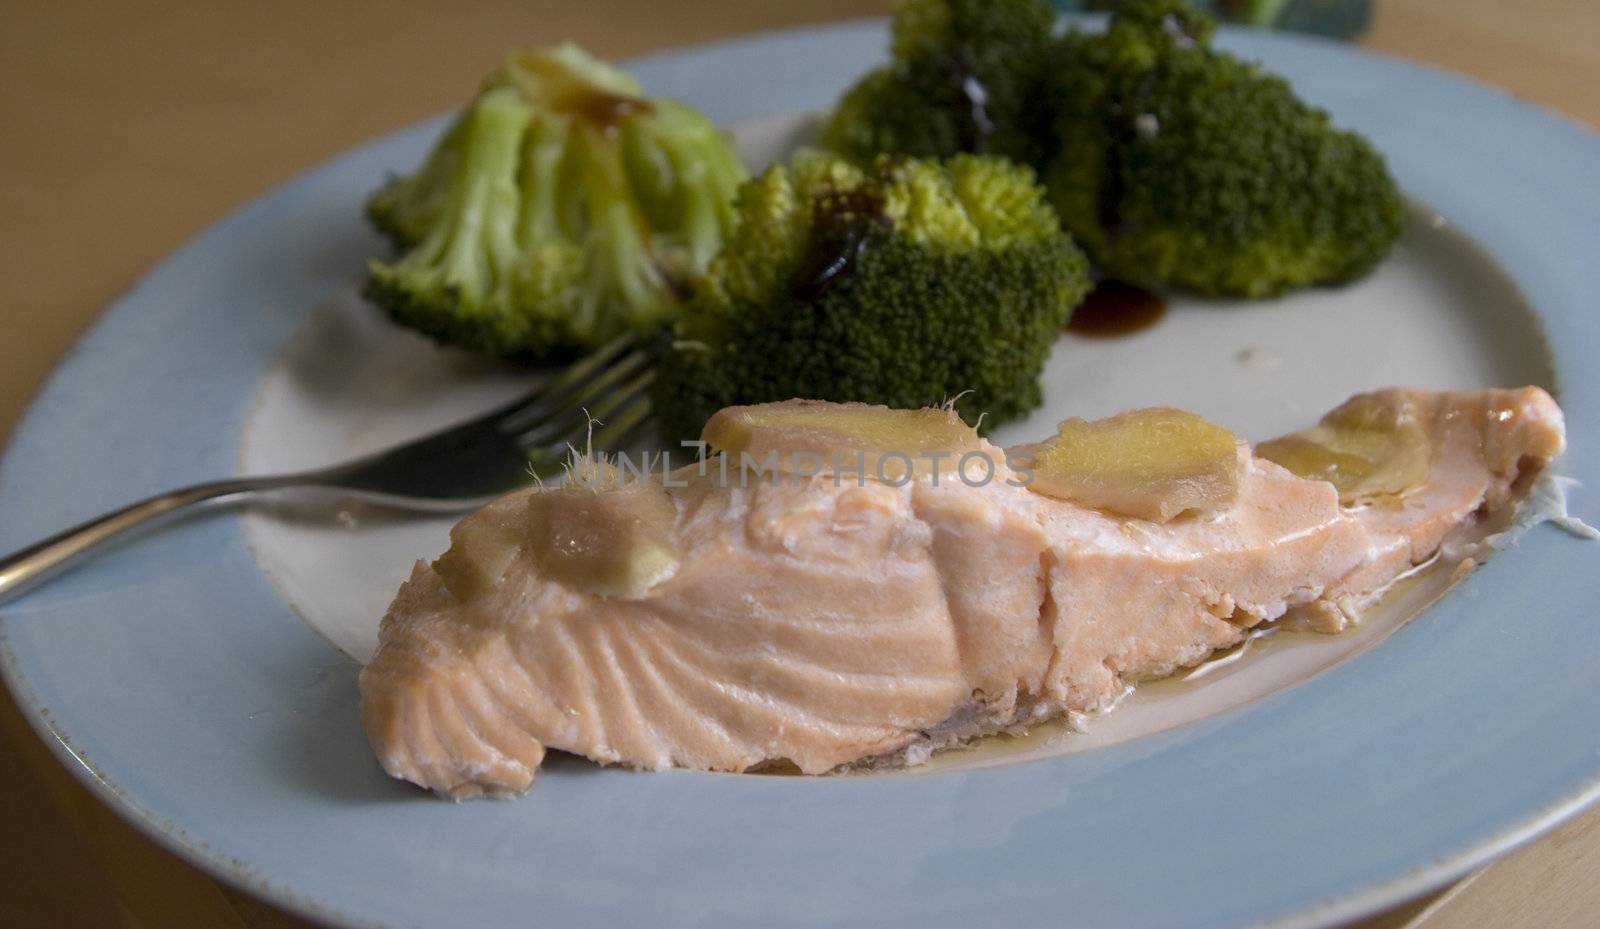 Plate with fish topped with ginger with broccolis on the side